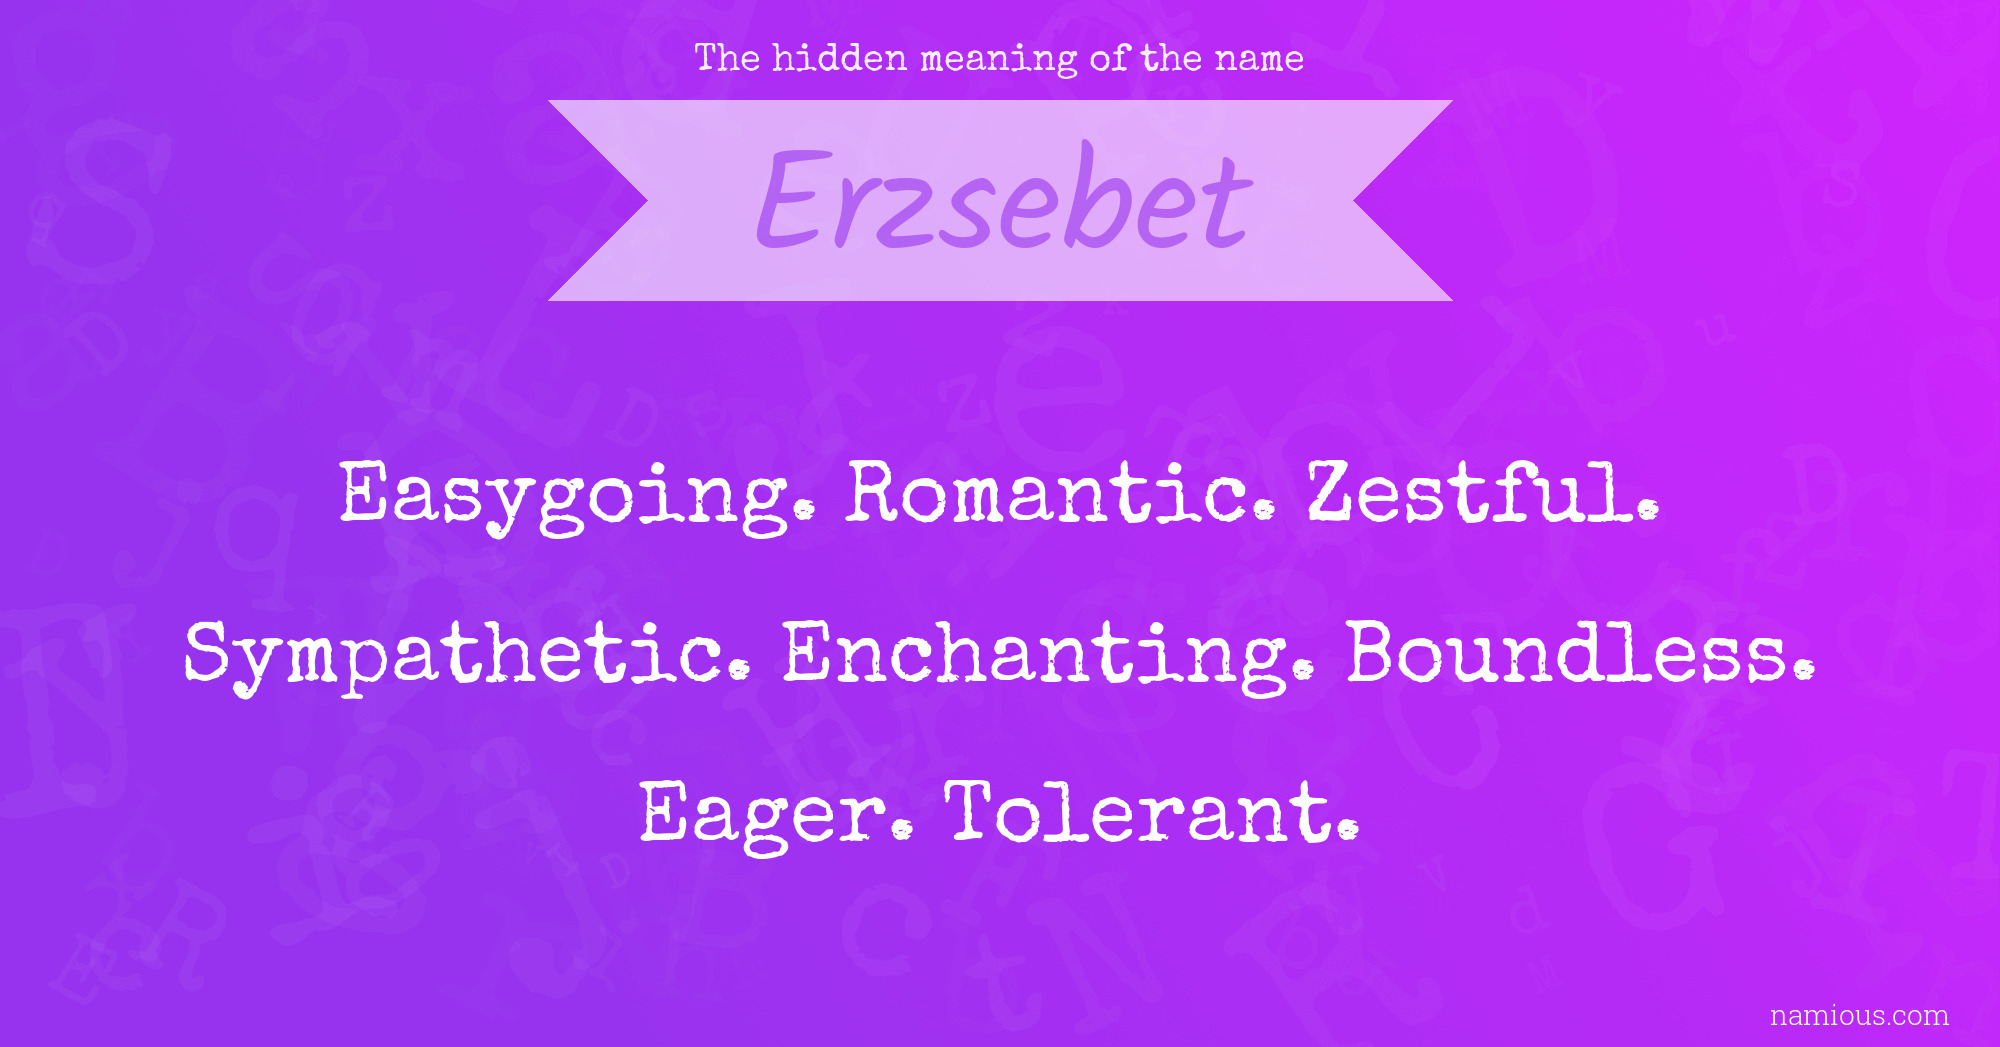 The hidden meaning of the name Erzsebet